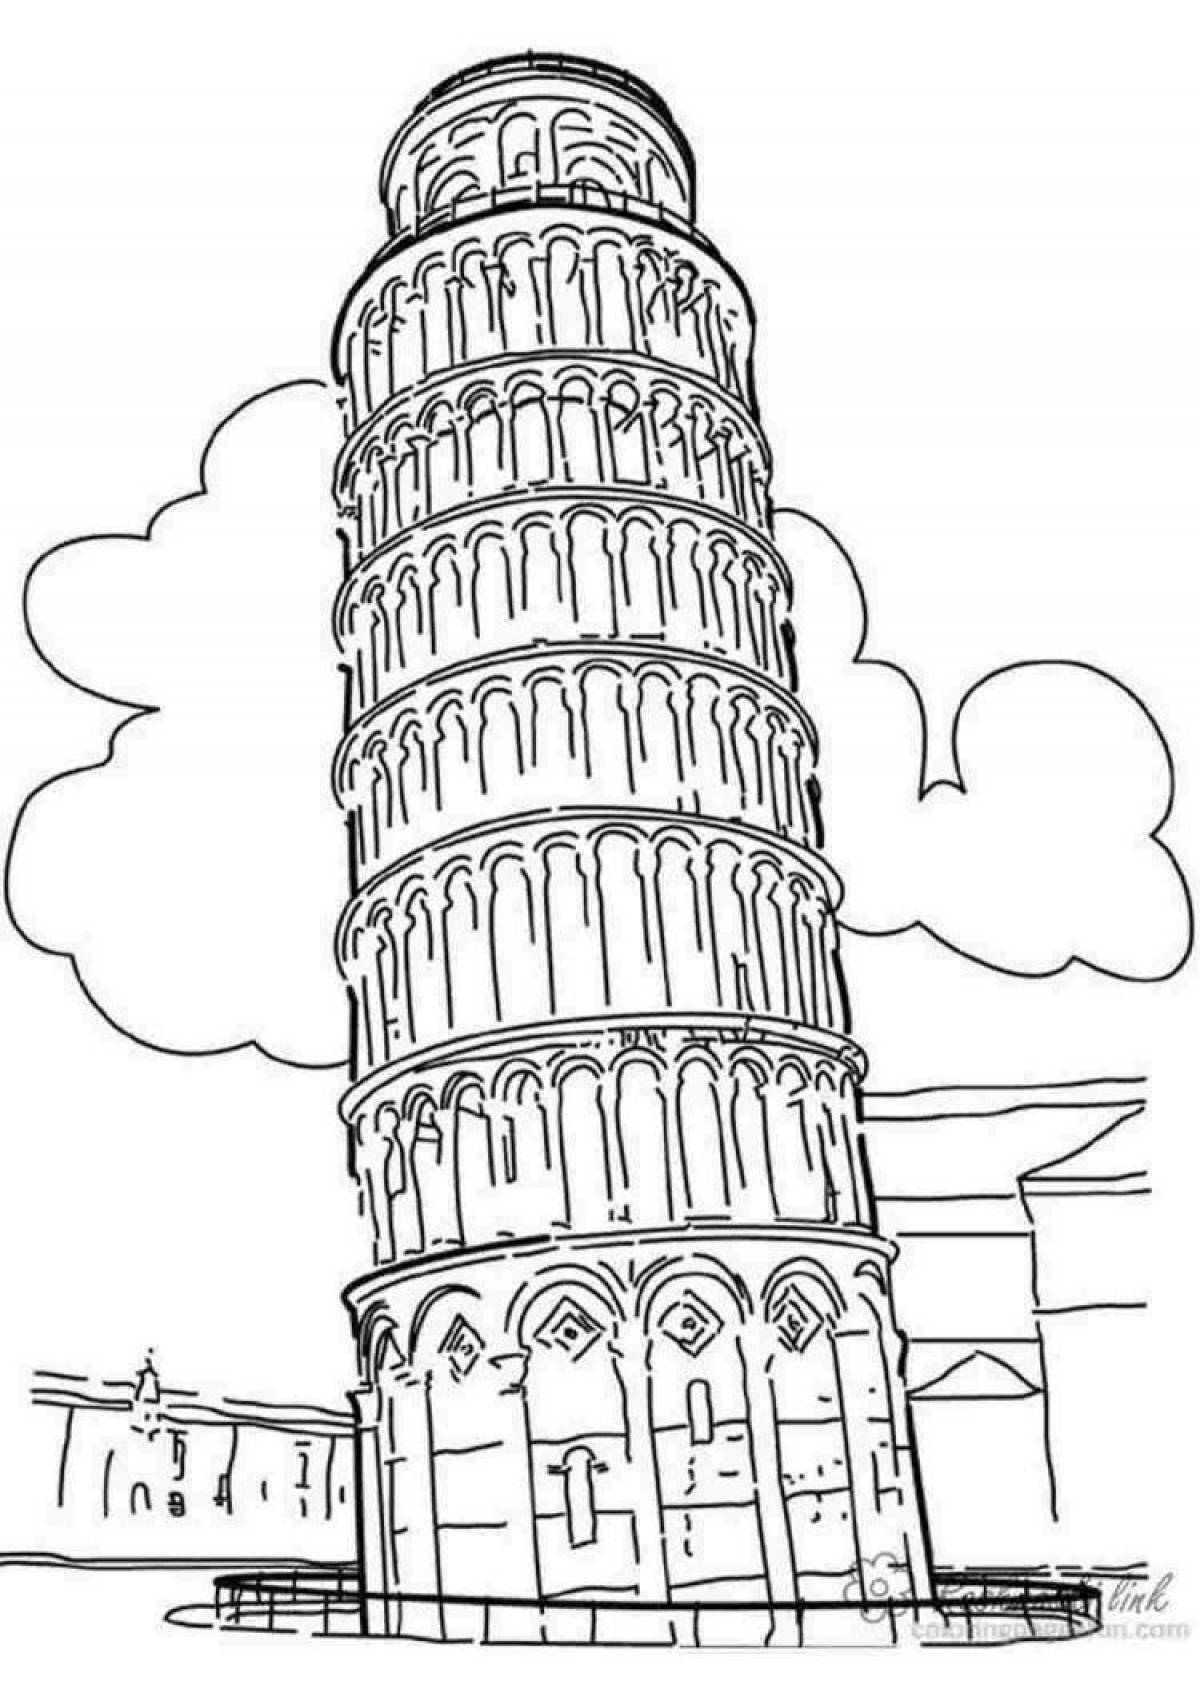 Coloring book happy tower for kids